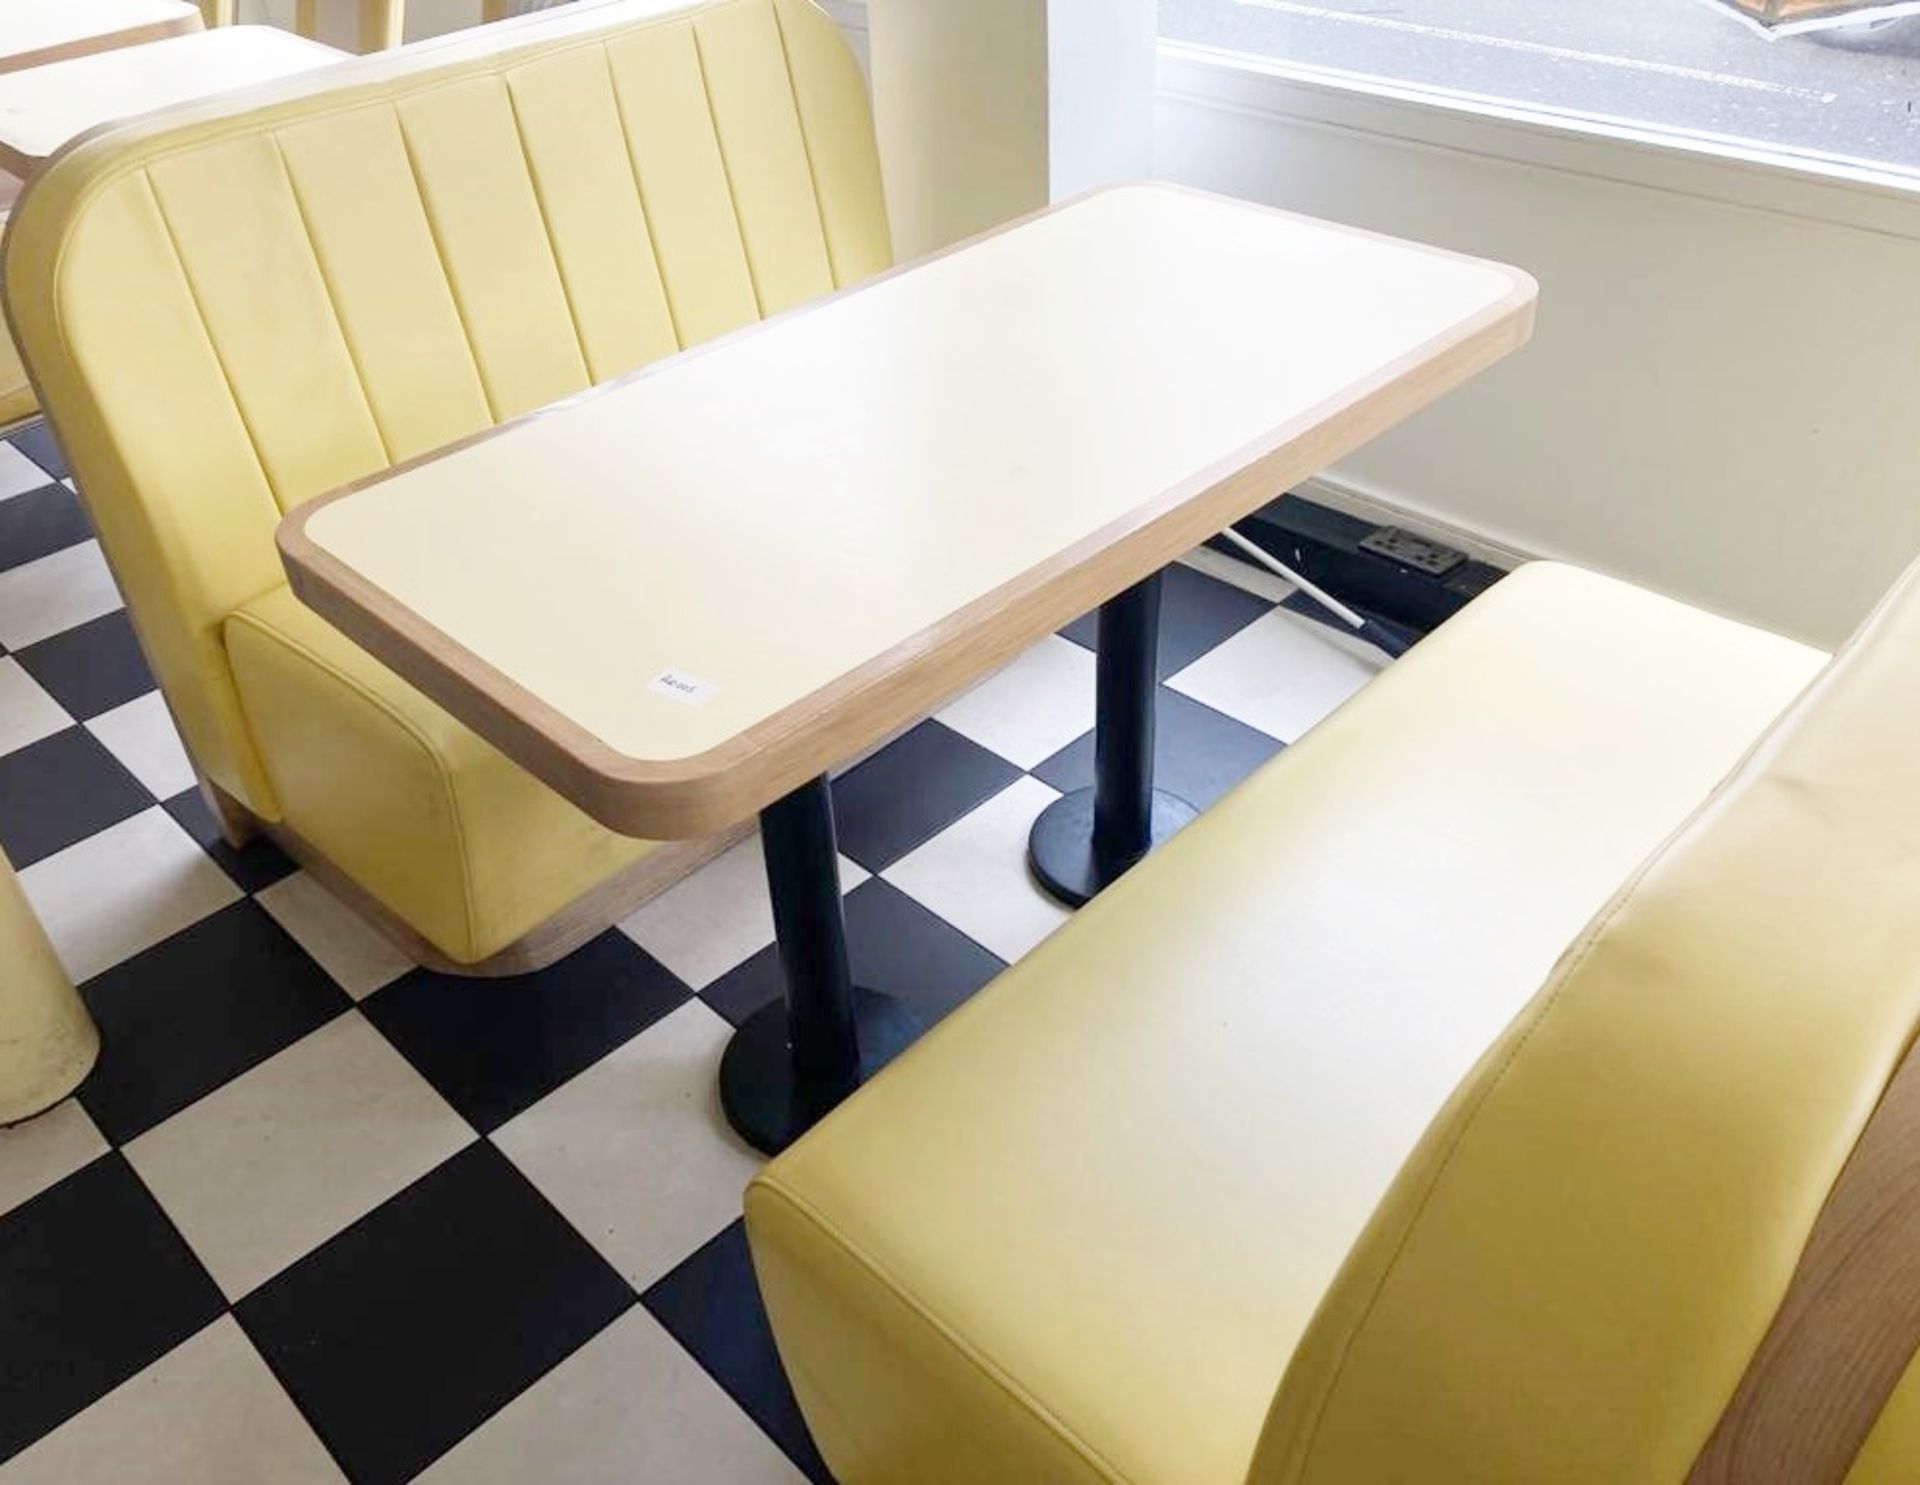 1 x Collection of Restaurant Seating Benches and Tables - Features a Light Wood and Faux Leather - Image 11 of 13